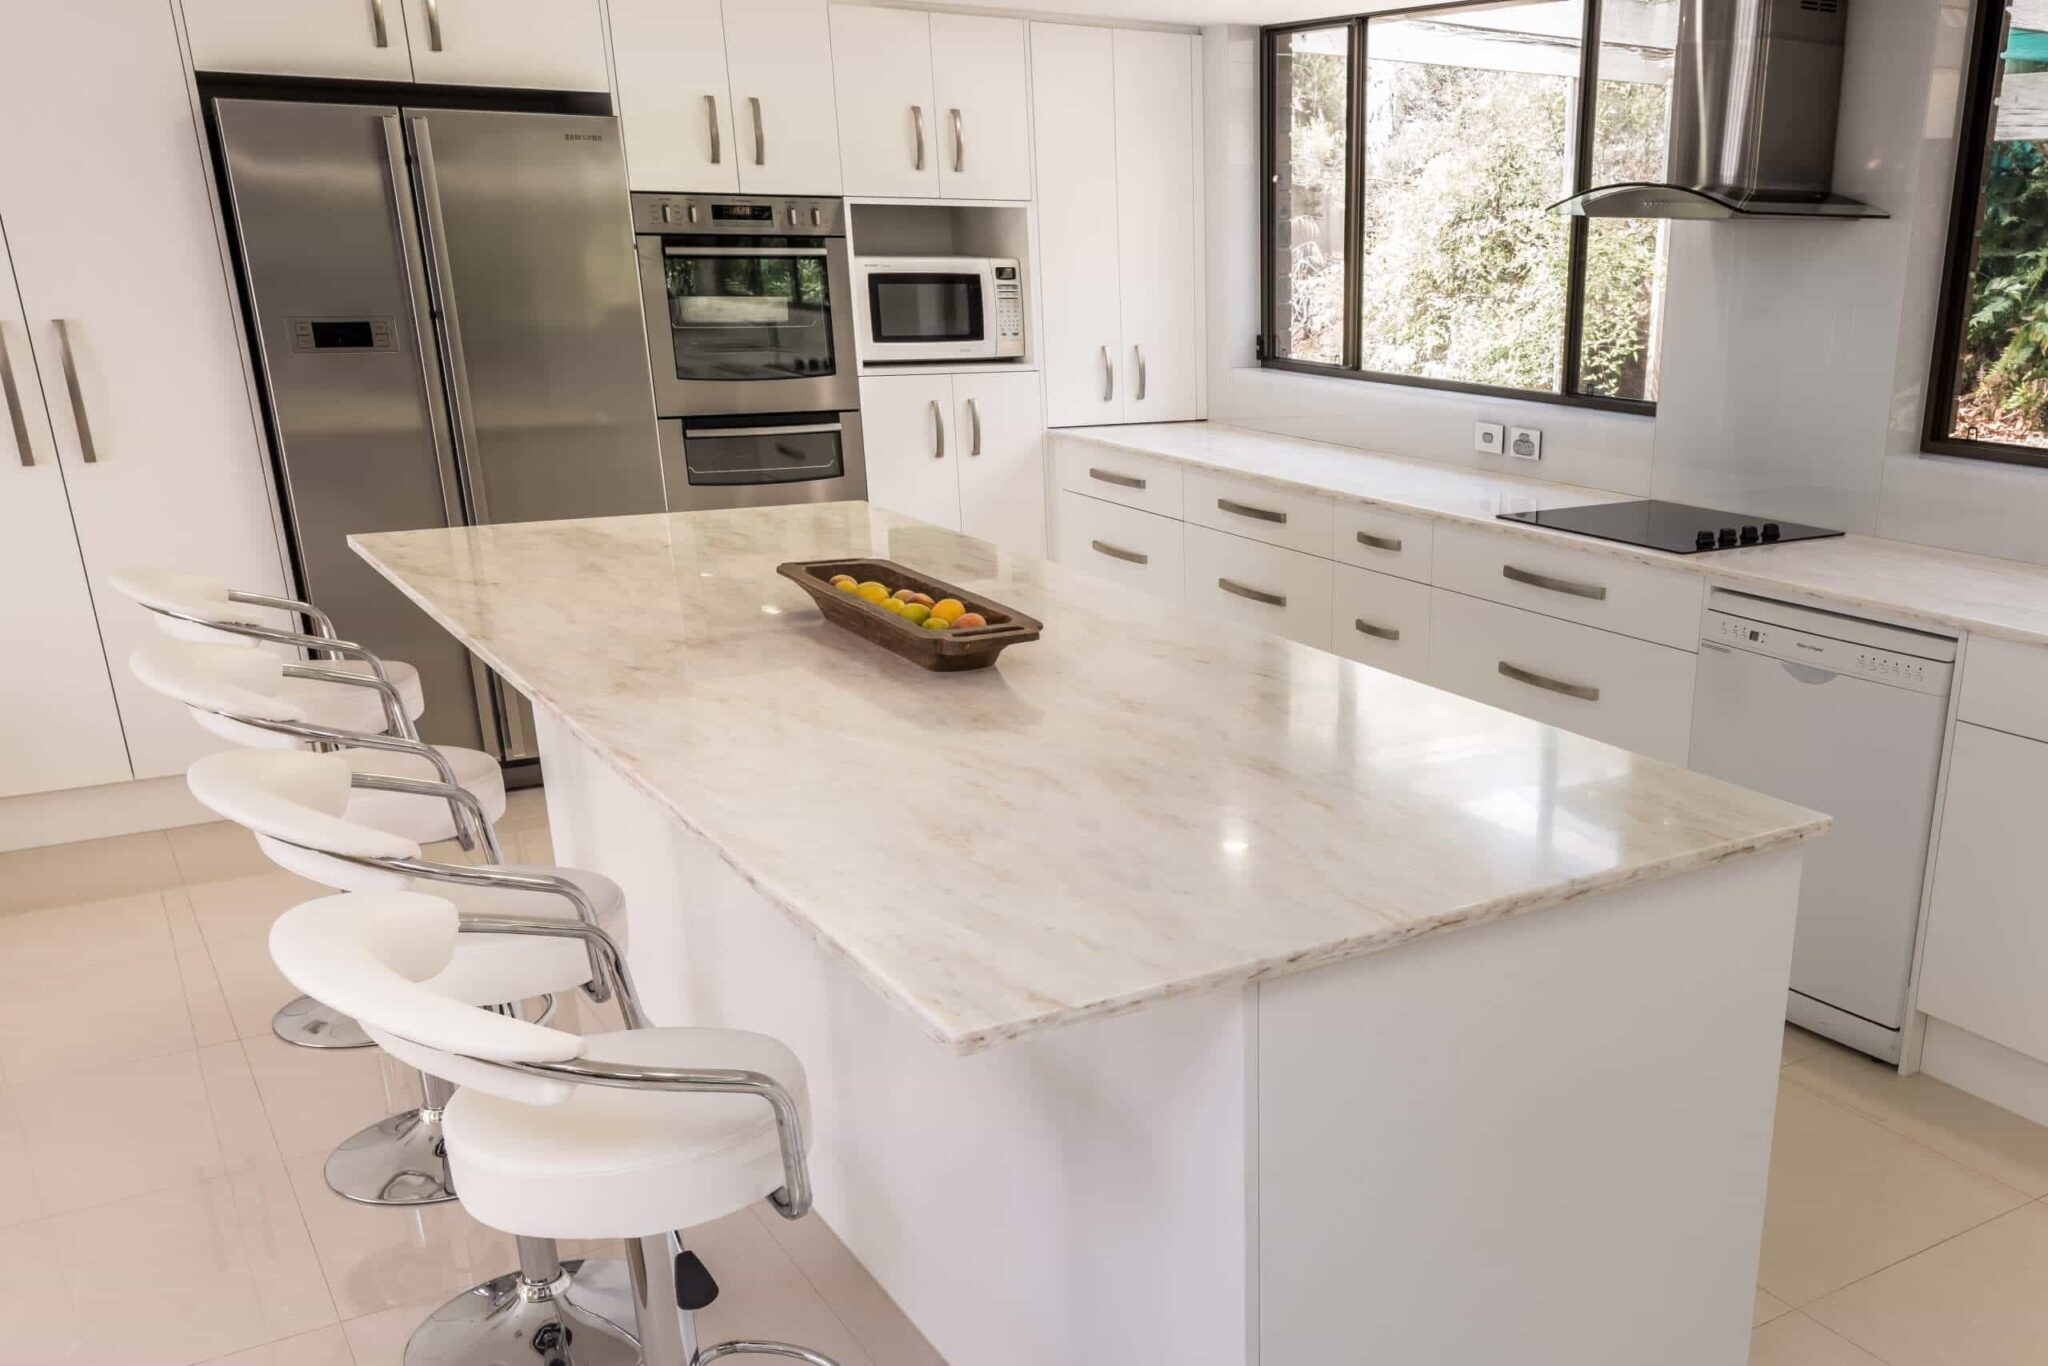 3 wide corian countertop and kitchen size sink